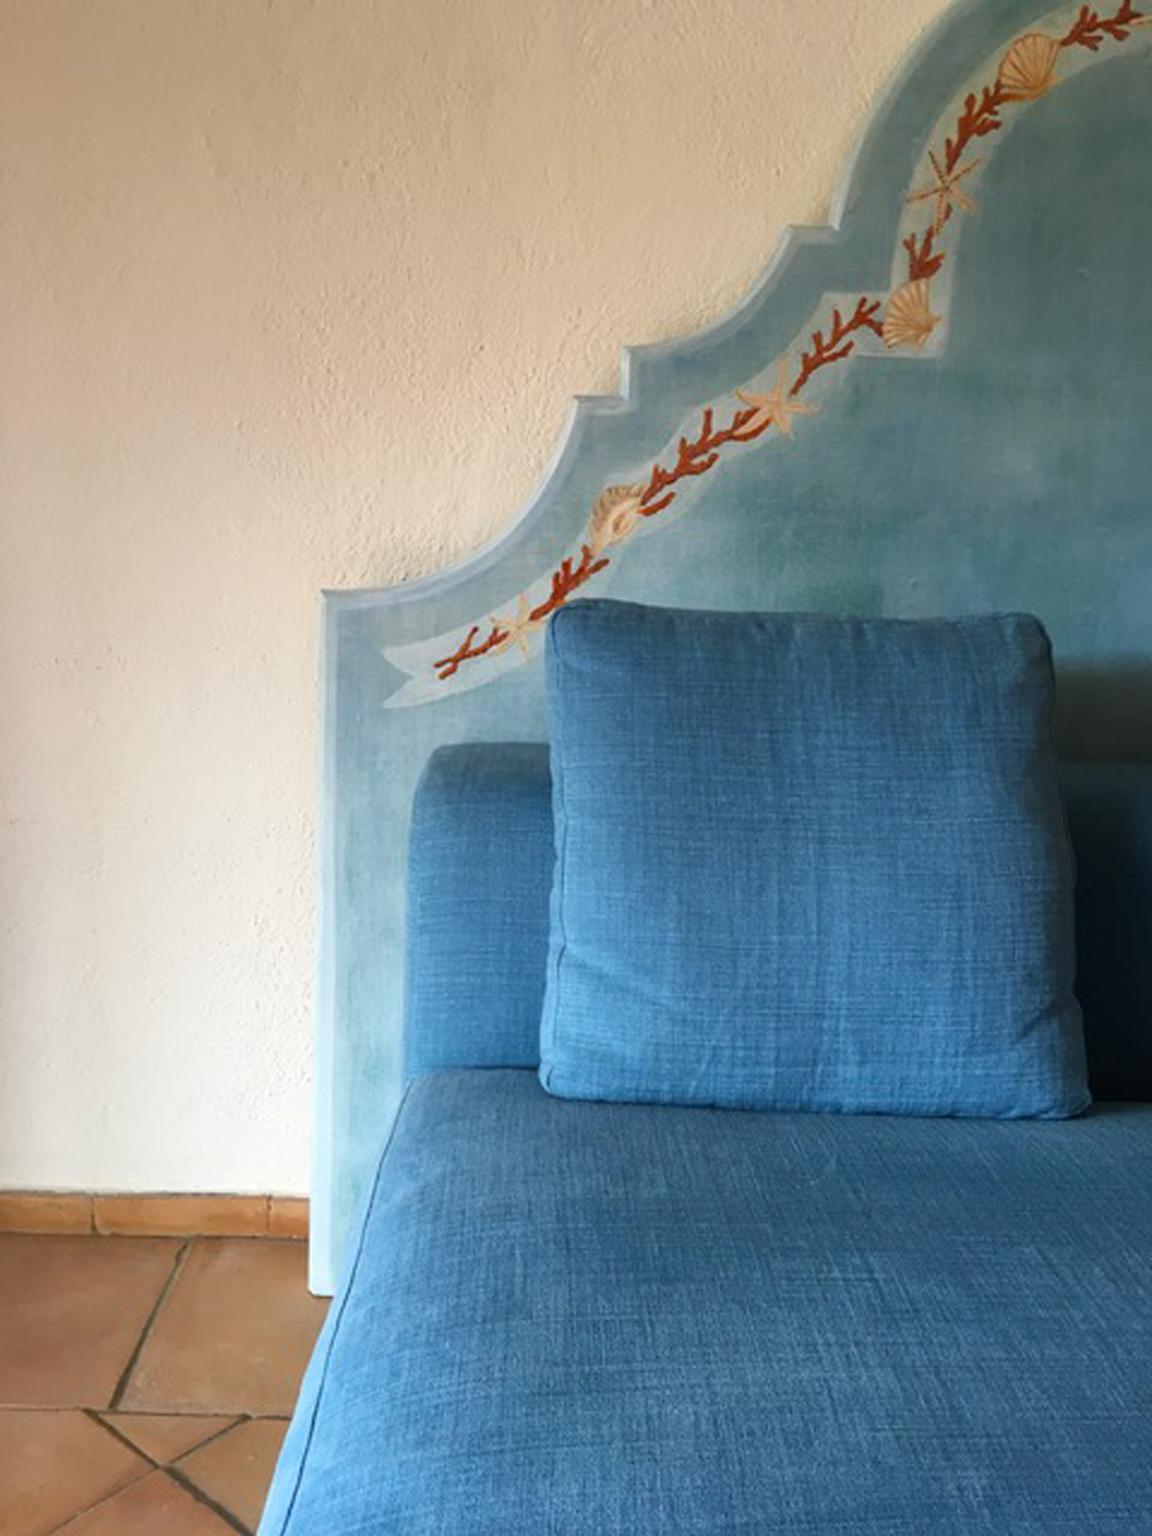 This beautiful hand painted in blue and red coral bed frame, is an Italian contemporary production in Modern Style, after Gabriella Crespi, a famous Italian interior designer of 1960'. Her style was symbol of elegance and creativity.

The piece